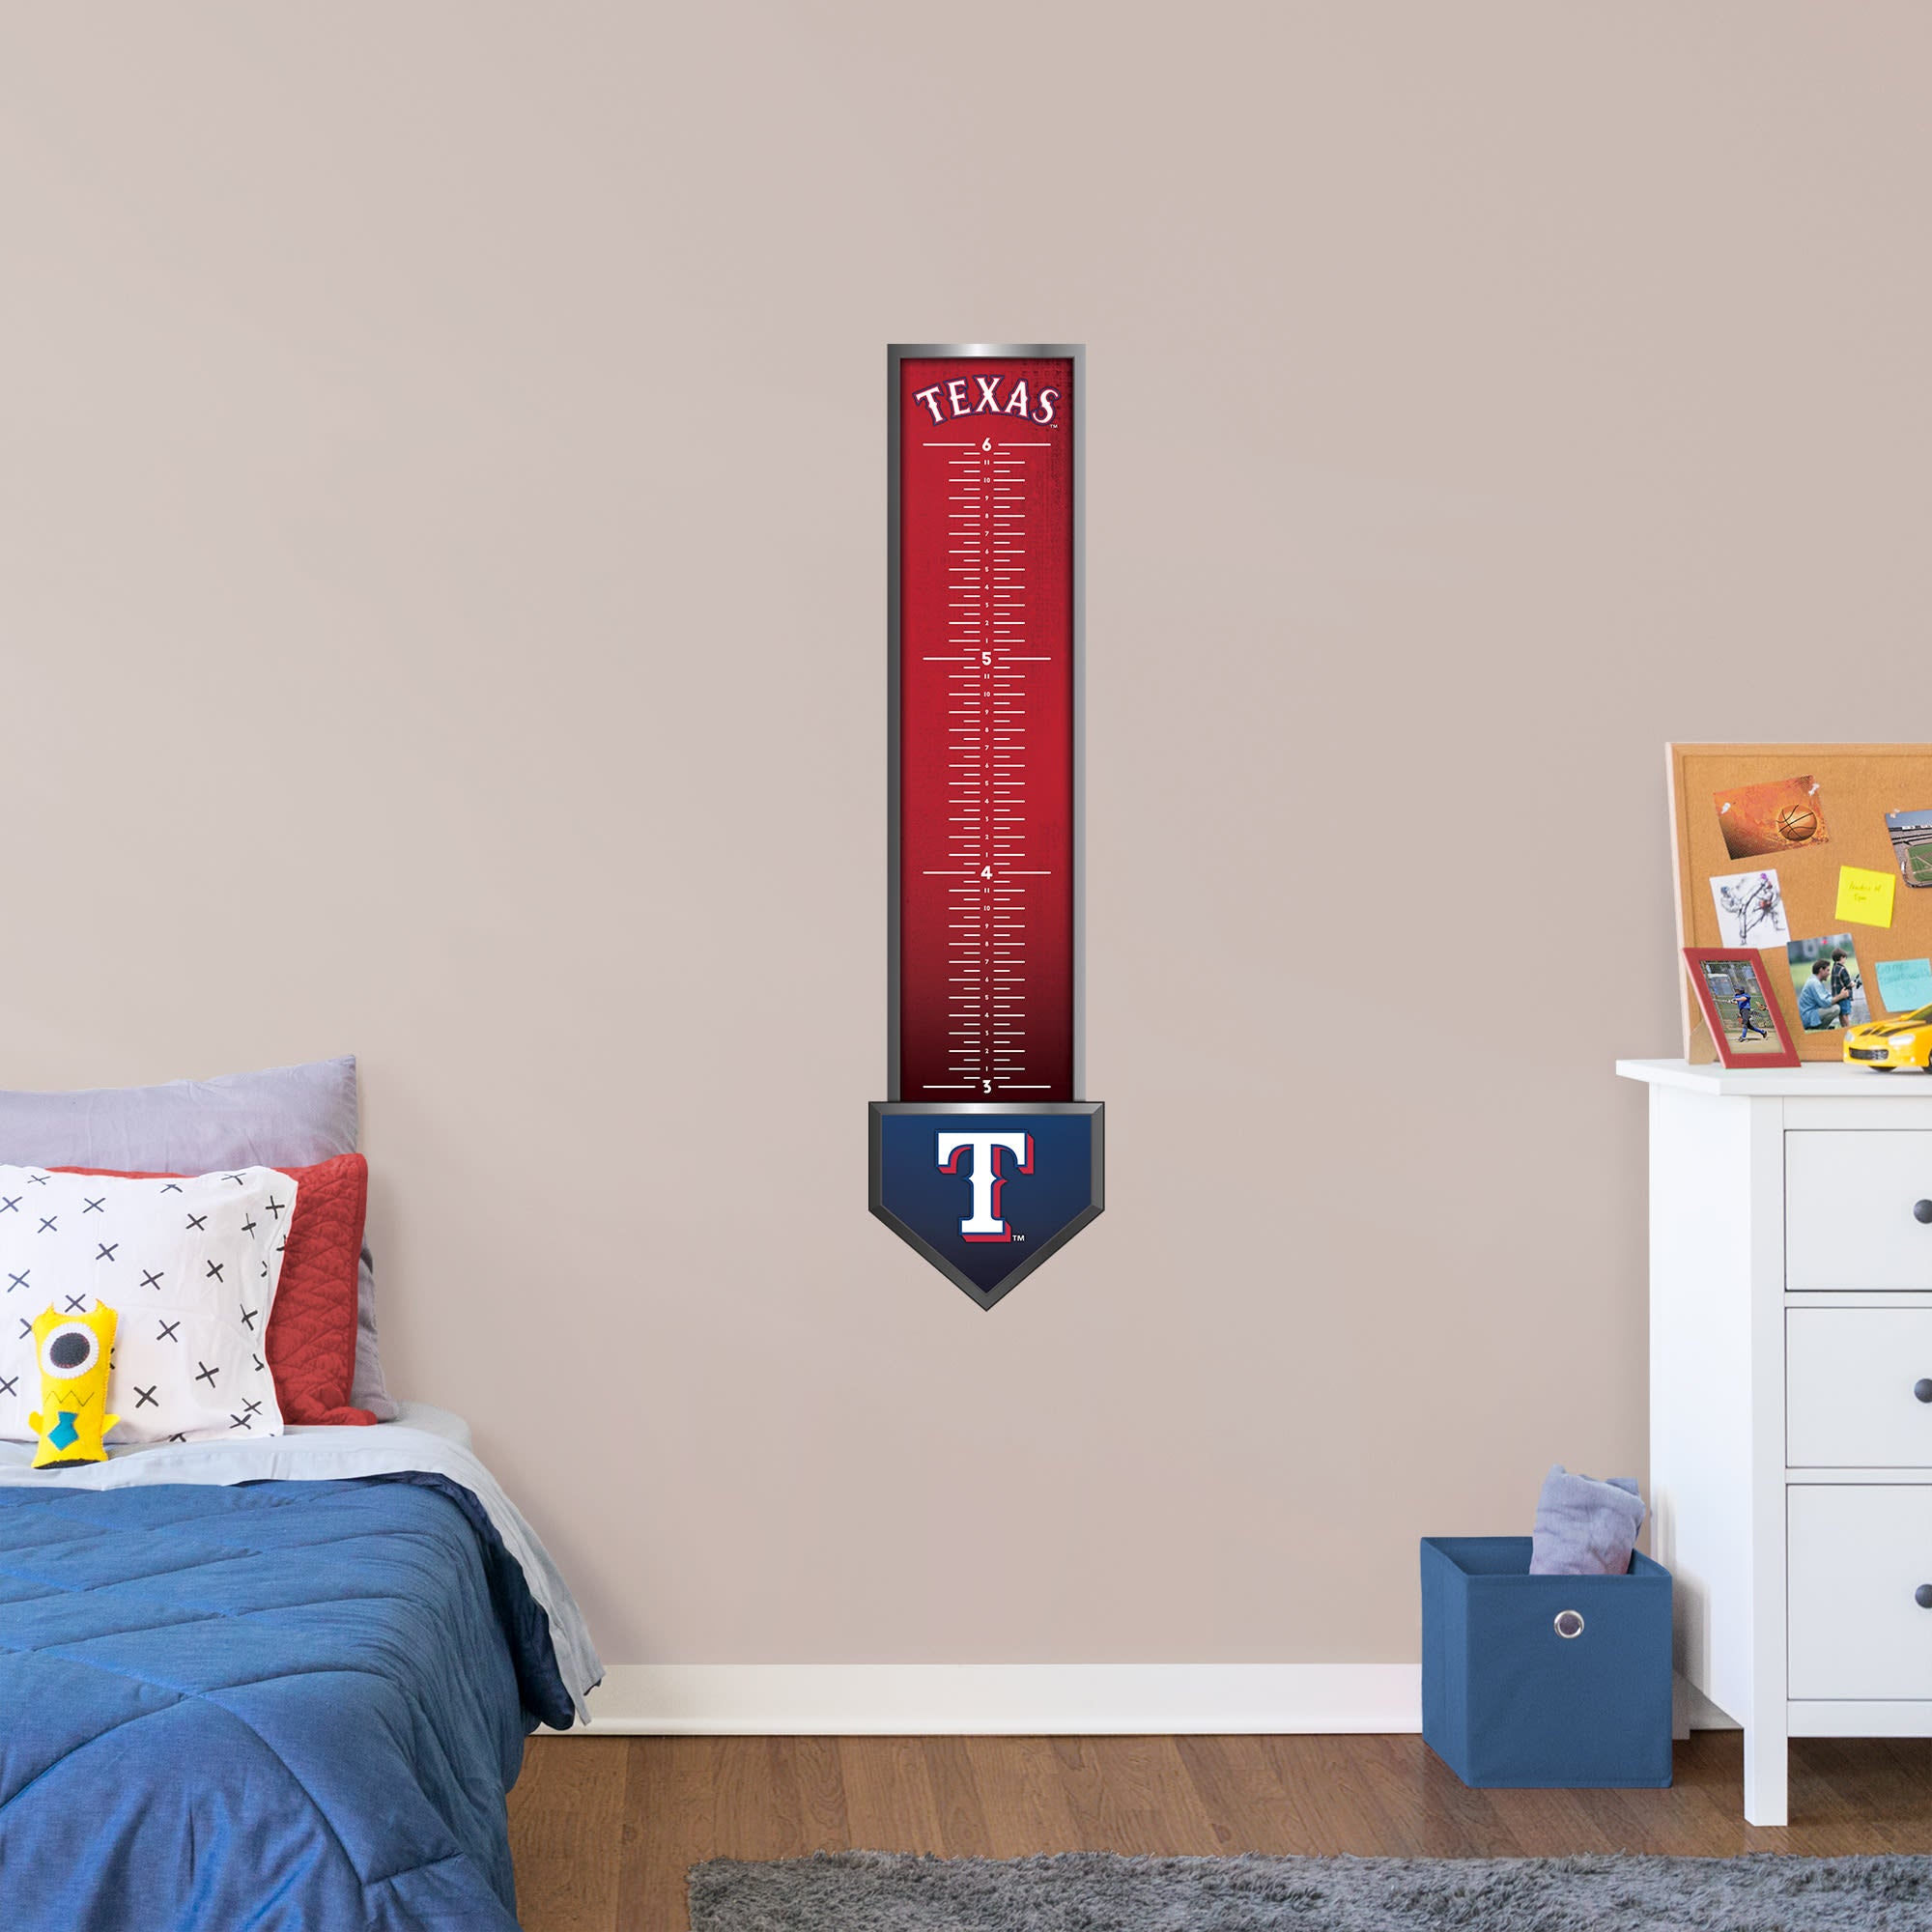 Texas Rangers: Growth Chart - Officially Licensed MLB Removable Wall Graphic 13.0"W x 54.0"H by Fathead | Vinyl